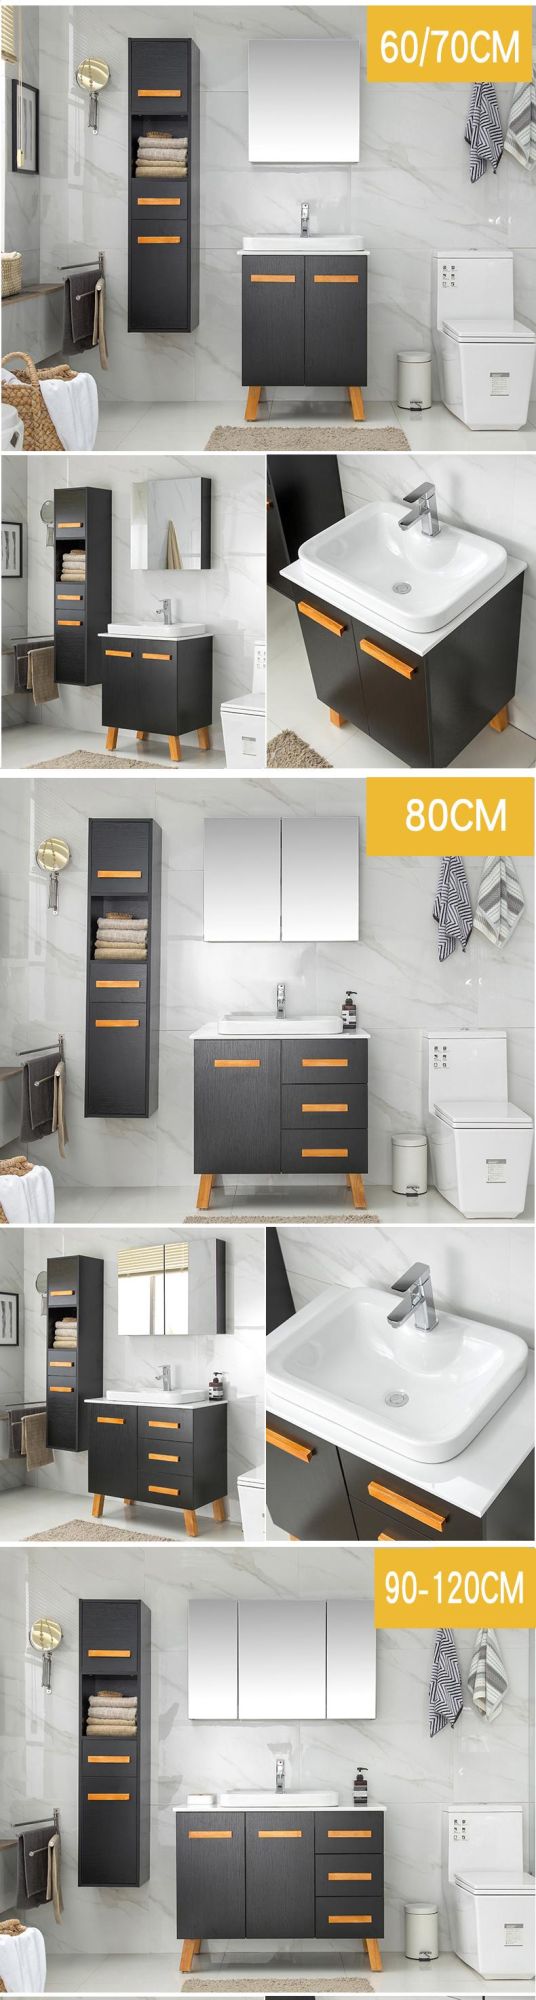 Wall Mounted Bathroom Vanity Cabinet with Hot Designs Metal Leg and Glass Mirror